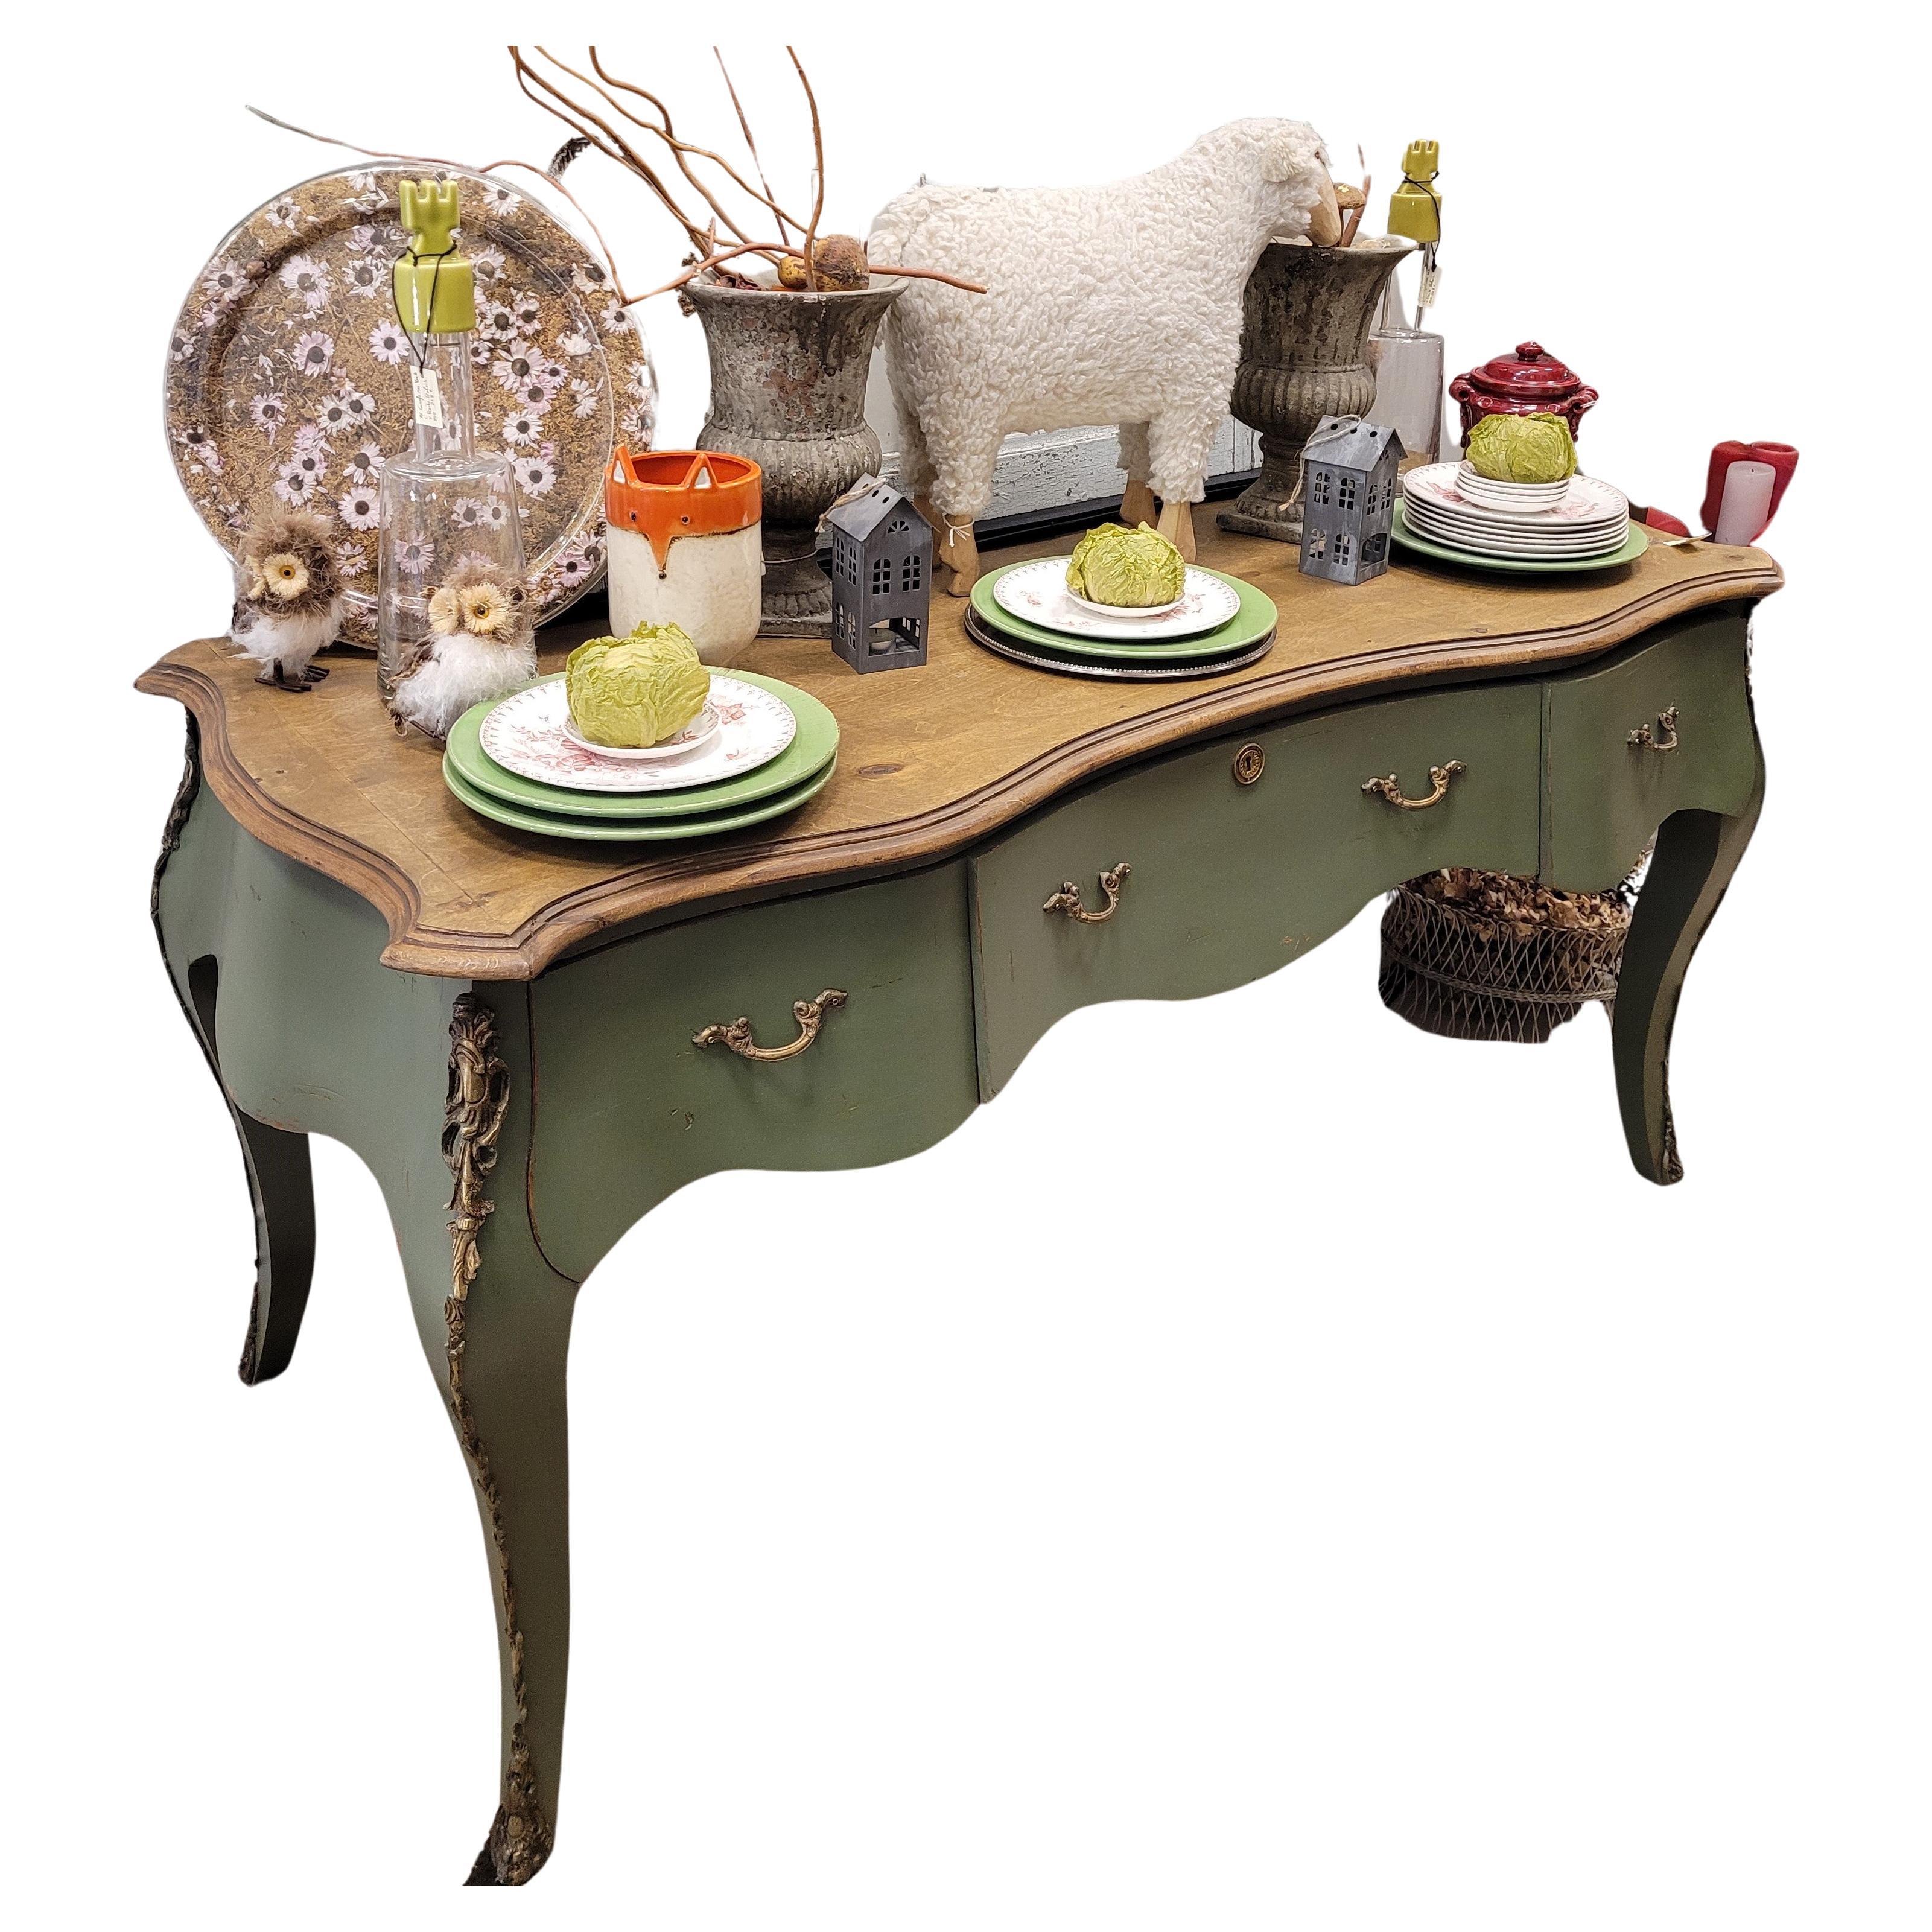 Provençal Green Center Console  table, polychrome, 50's - 60's - France For Sale